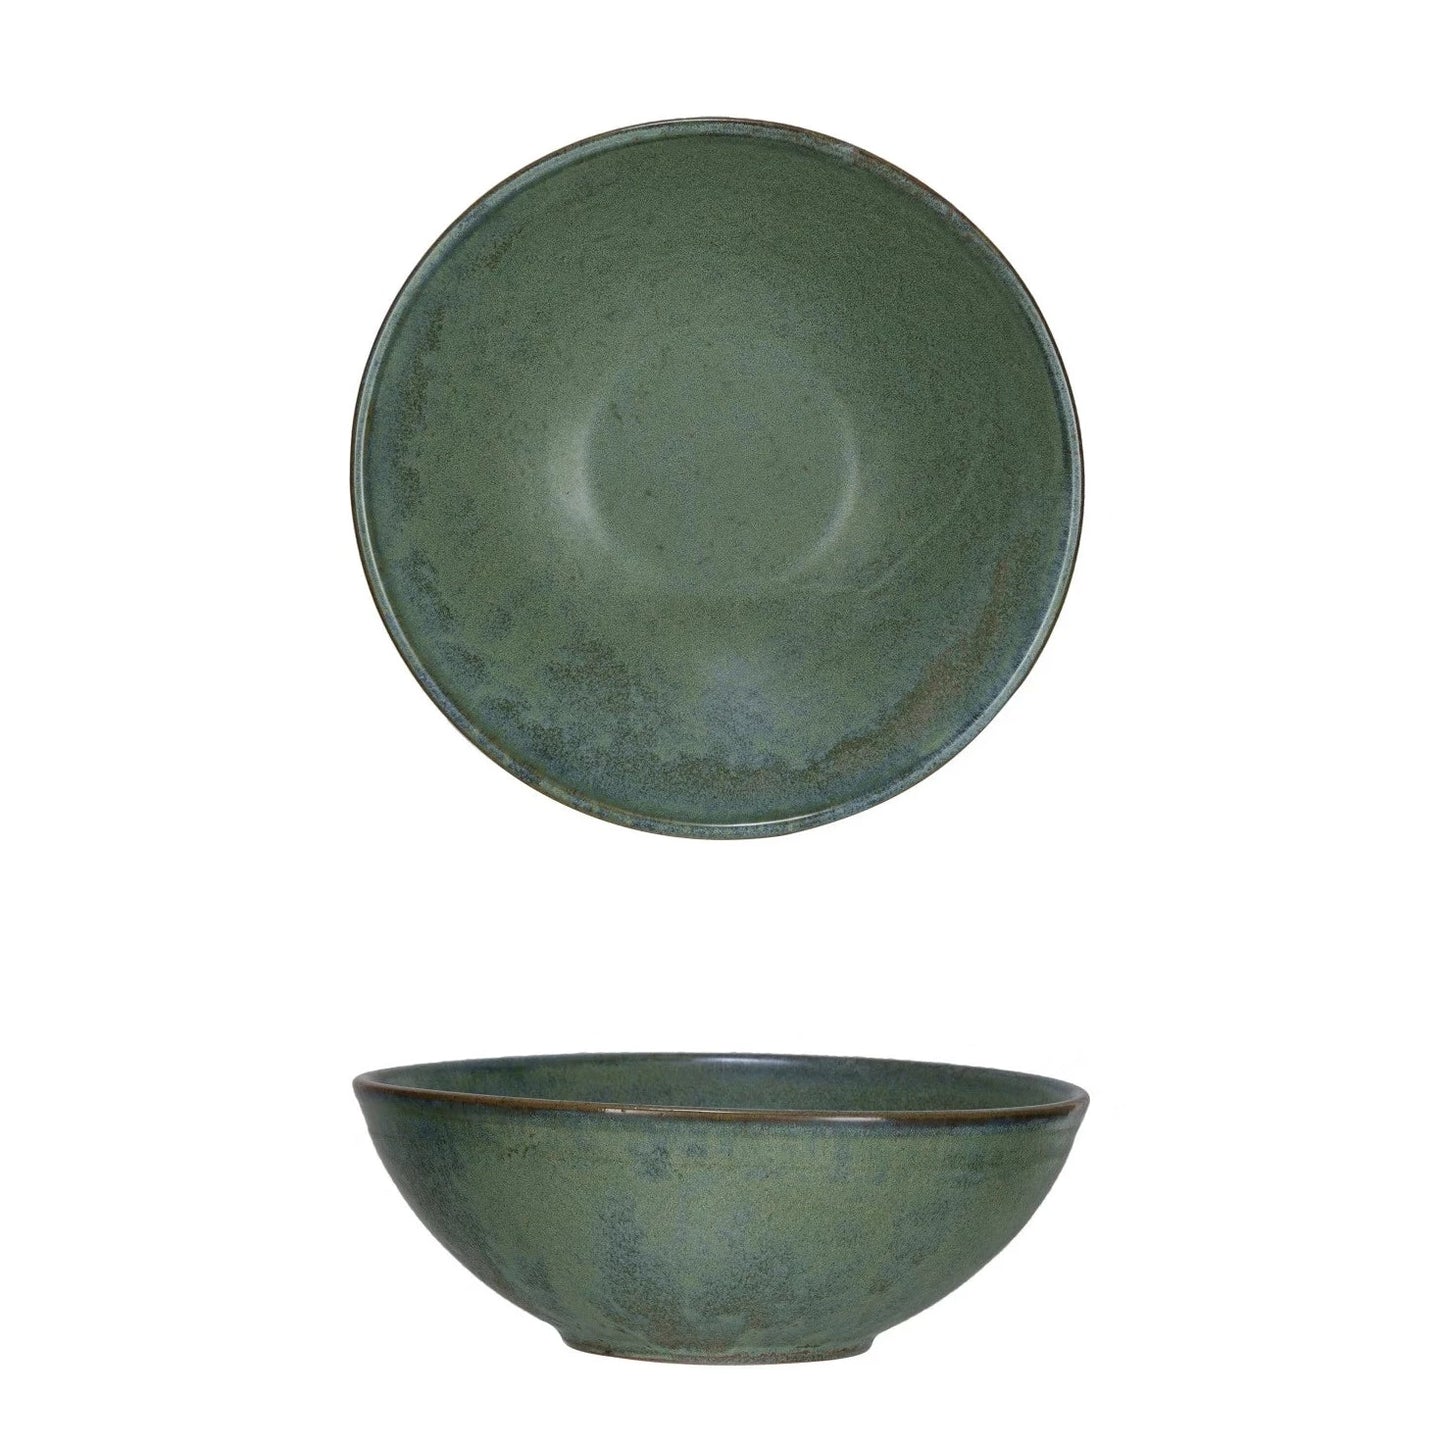 WYNN COLLECTION - SERVING BOWL